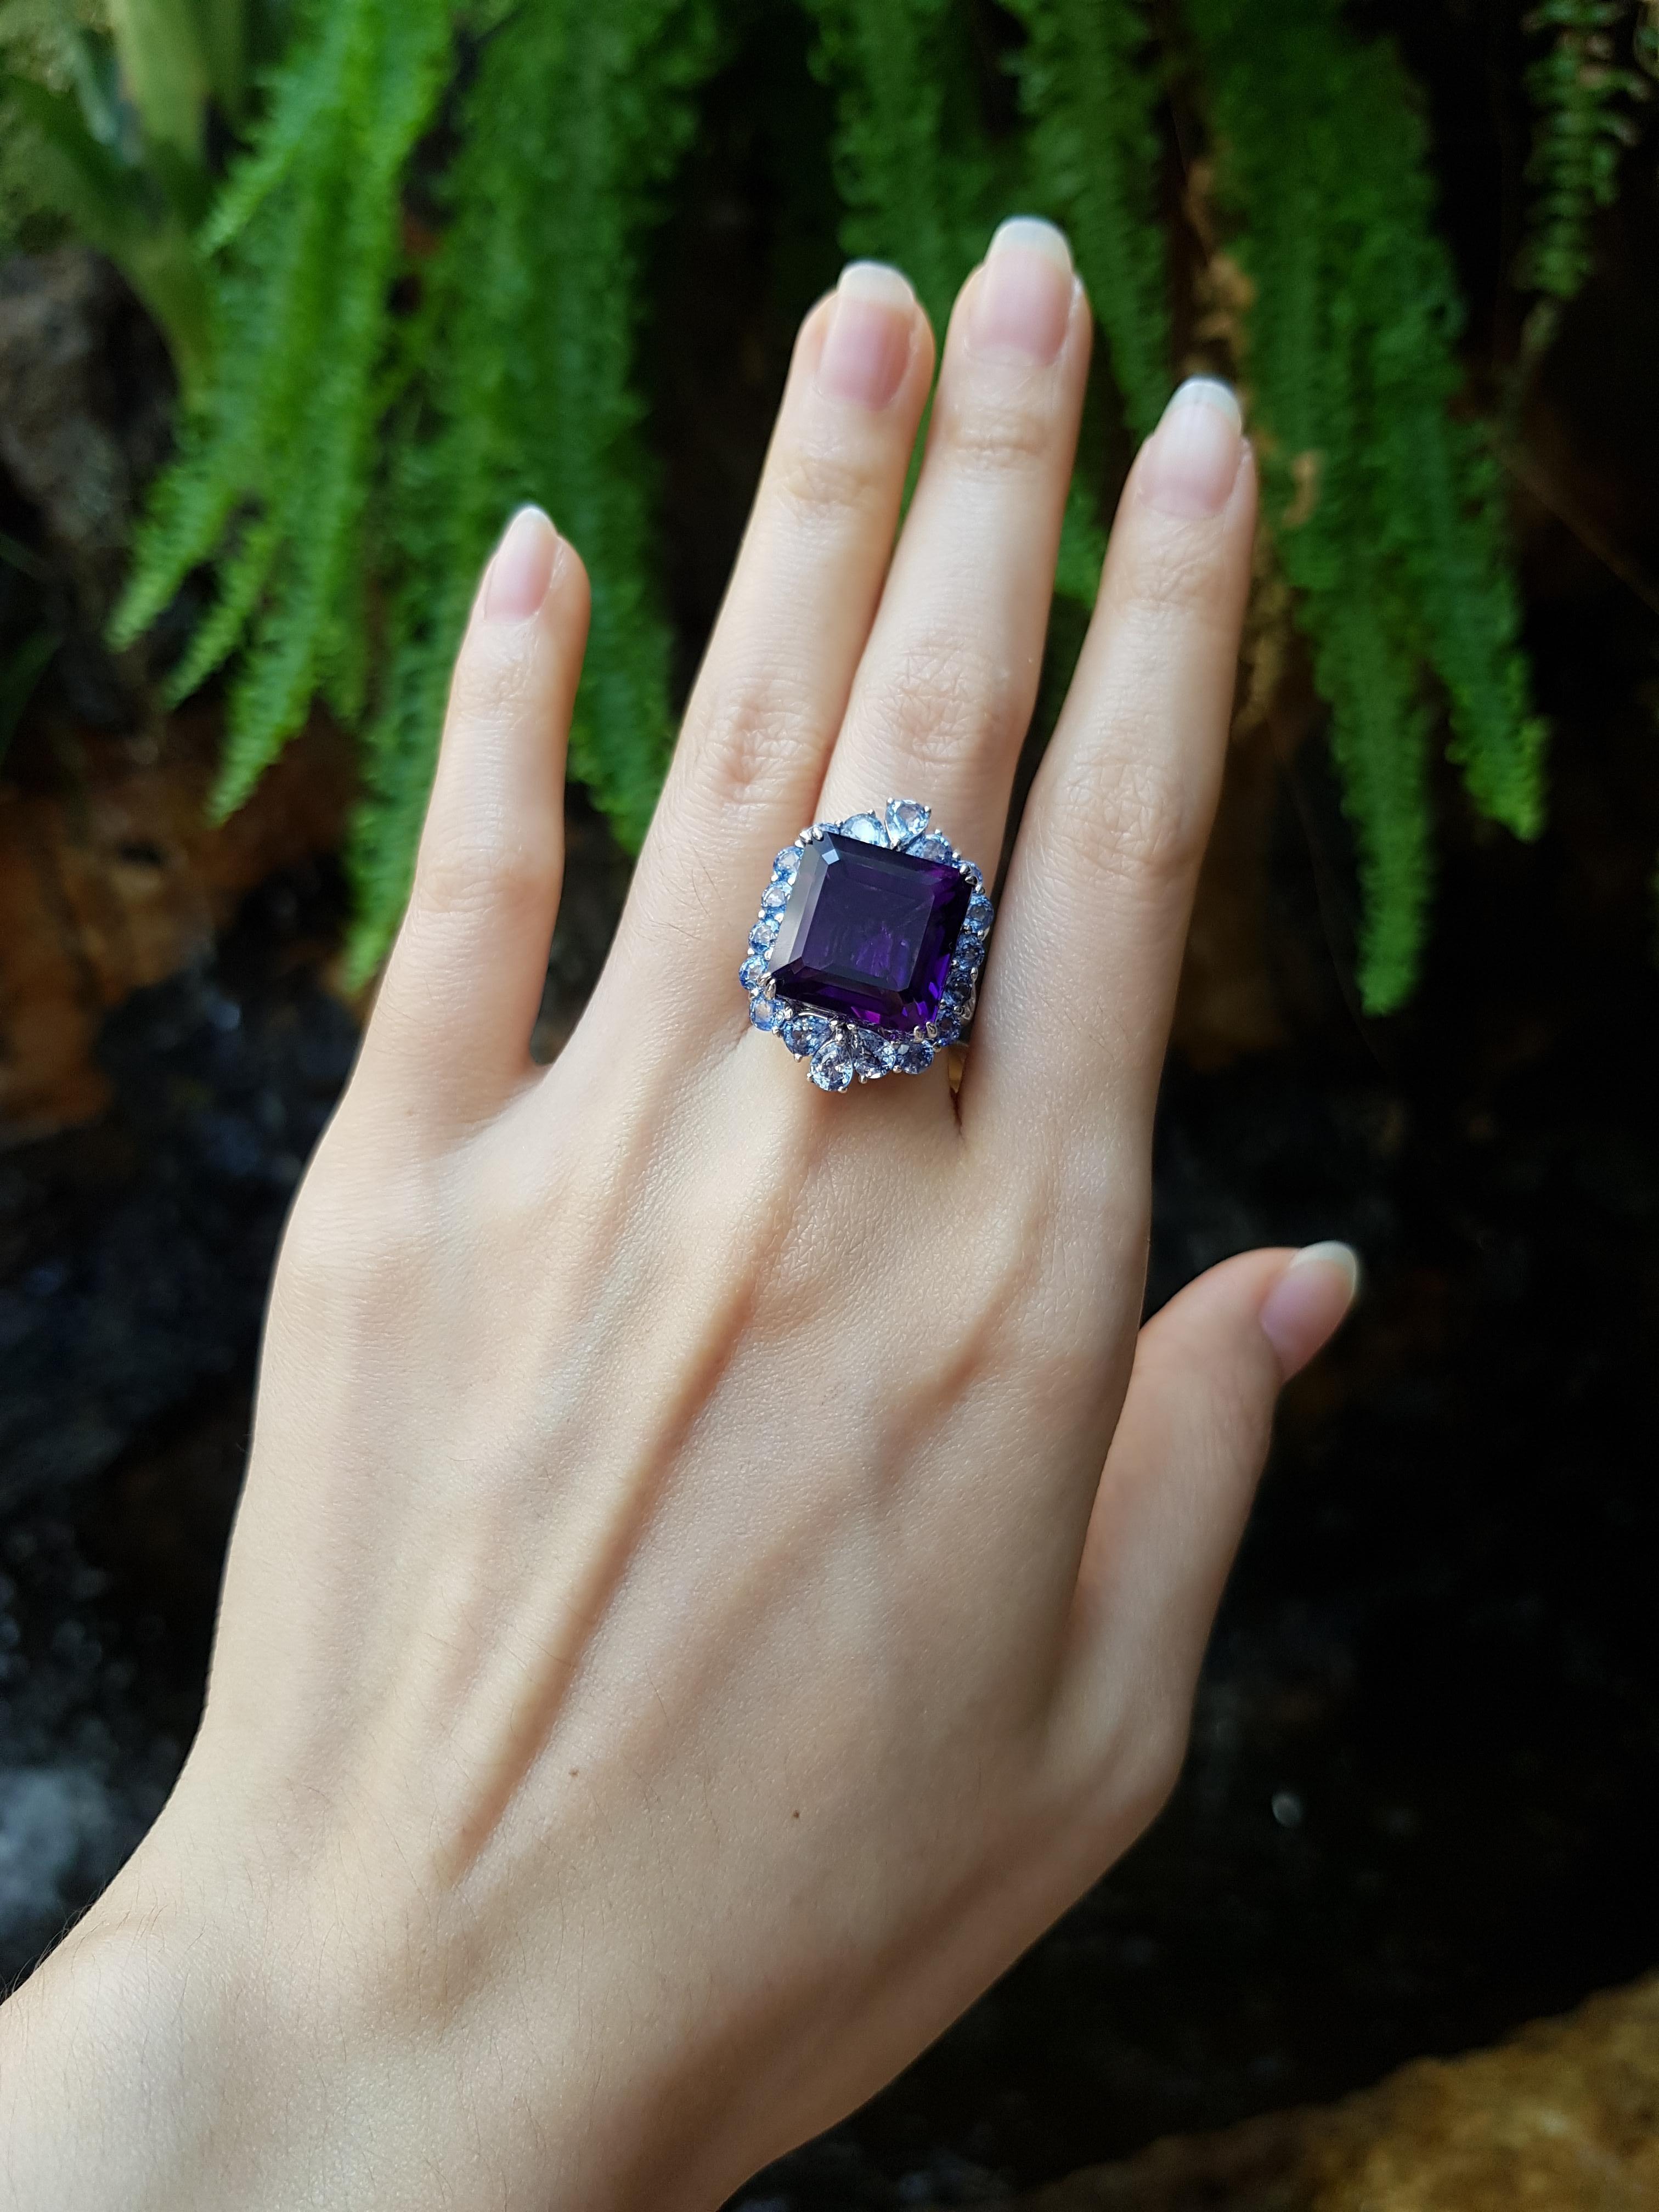 Amethyst 14.03 carats with Blue Sapphire 3.62 carats Ring set in 18 Karat White Gold Settings 

Width: 1.8 cm
Length: 1.8 cm 
Ring Size: 50

